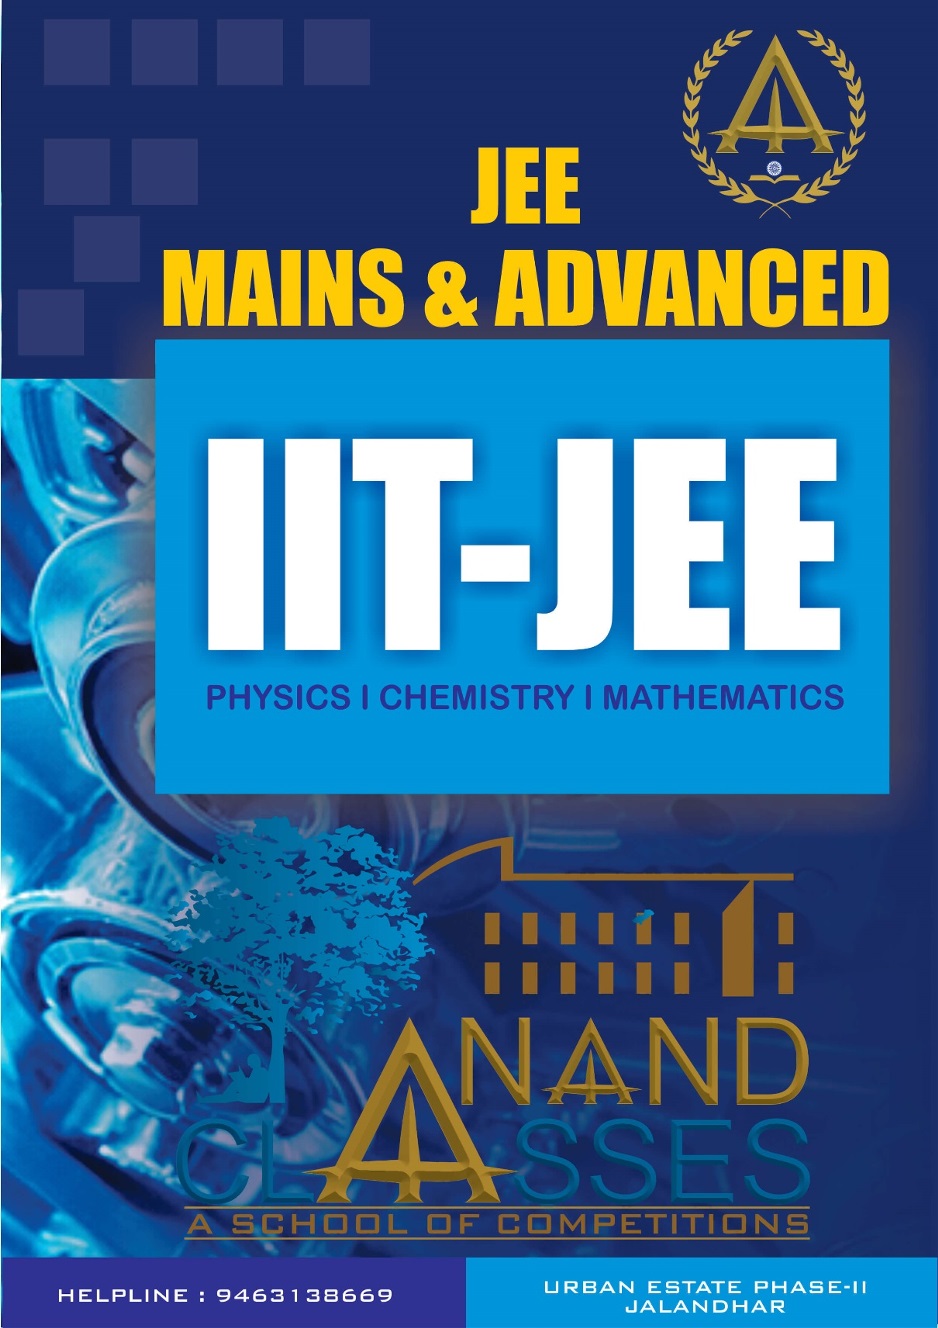 CALL 9463138669, ANAND CLASSES – BEST 11TH, 12TH PHYSICS, CHEMISTRY & MATHEMATICS ONLINE COACHING CLASSES IN JALANDHAR PUNJAB.